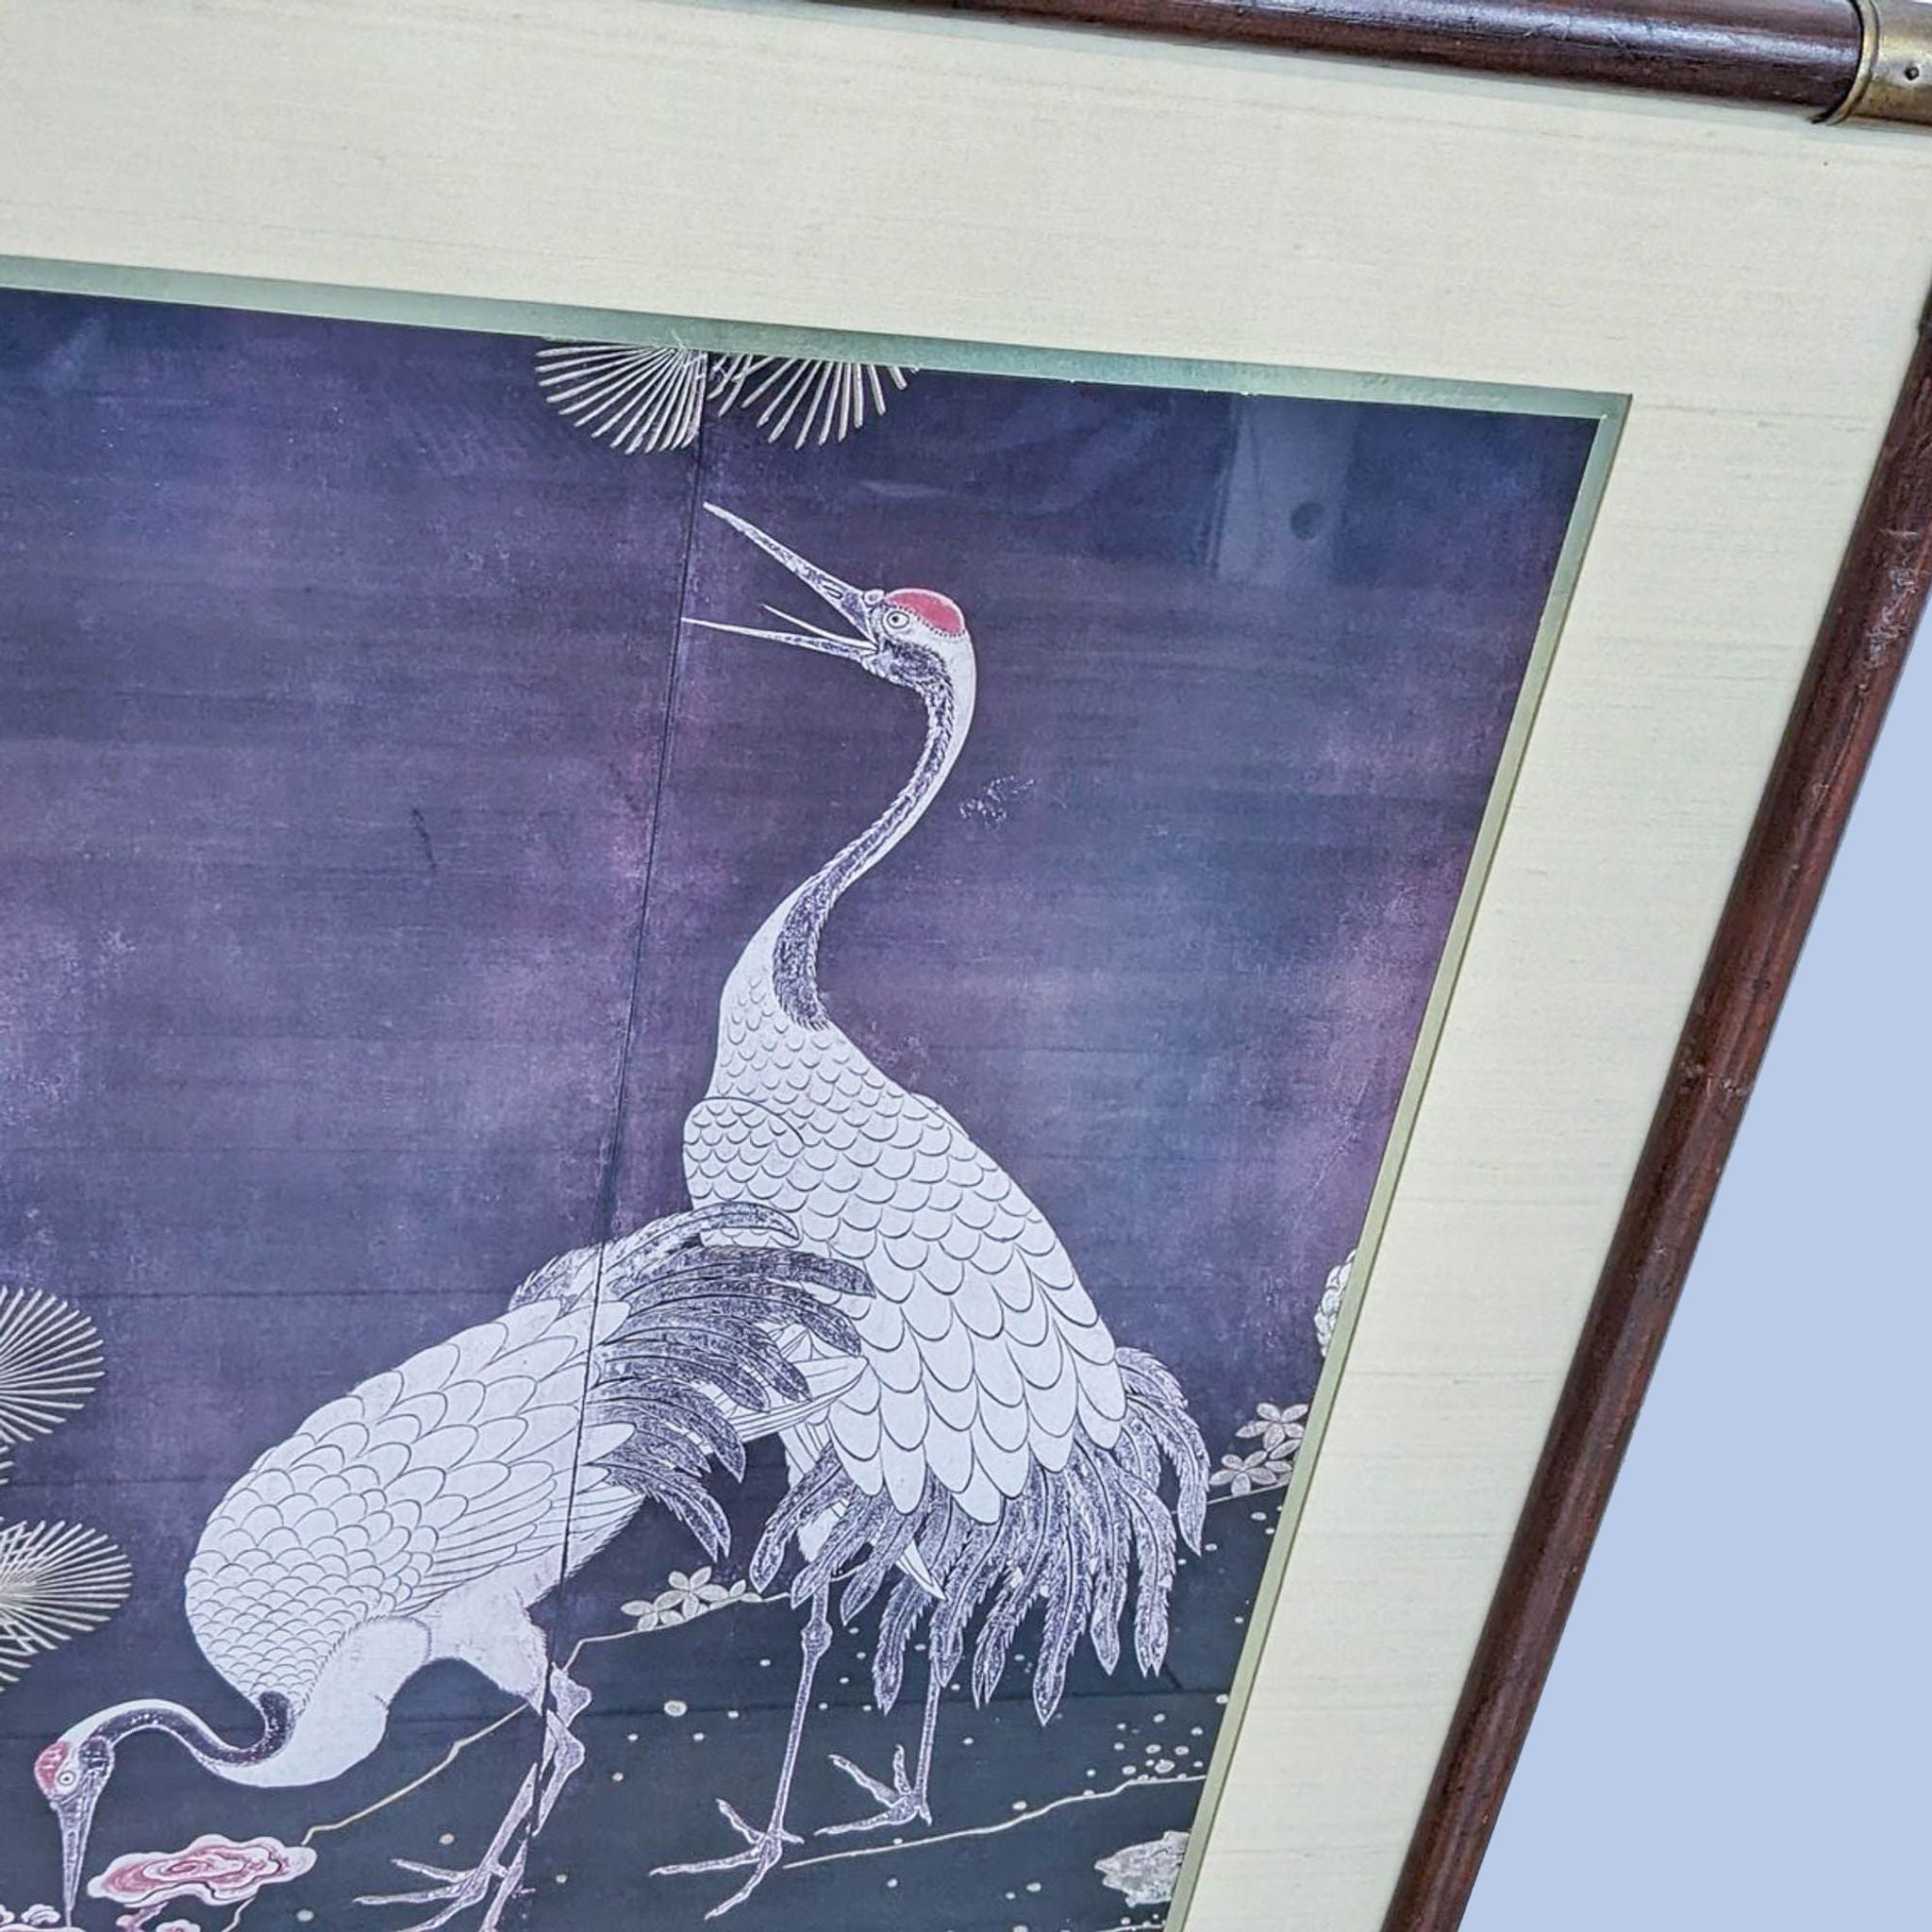 "Reperch brand Japanese-style print showcasing elegant cranes, mounted in a bamboo frame, reflecting vintage aesthetic."